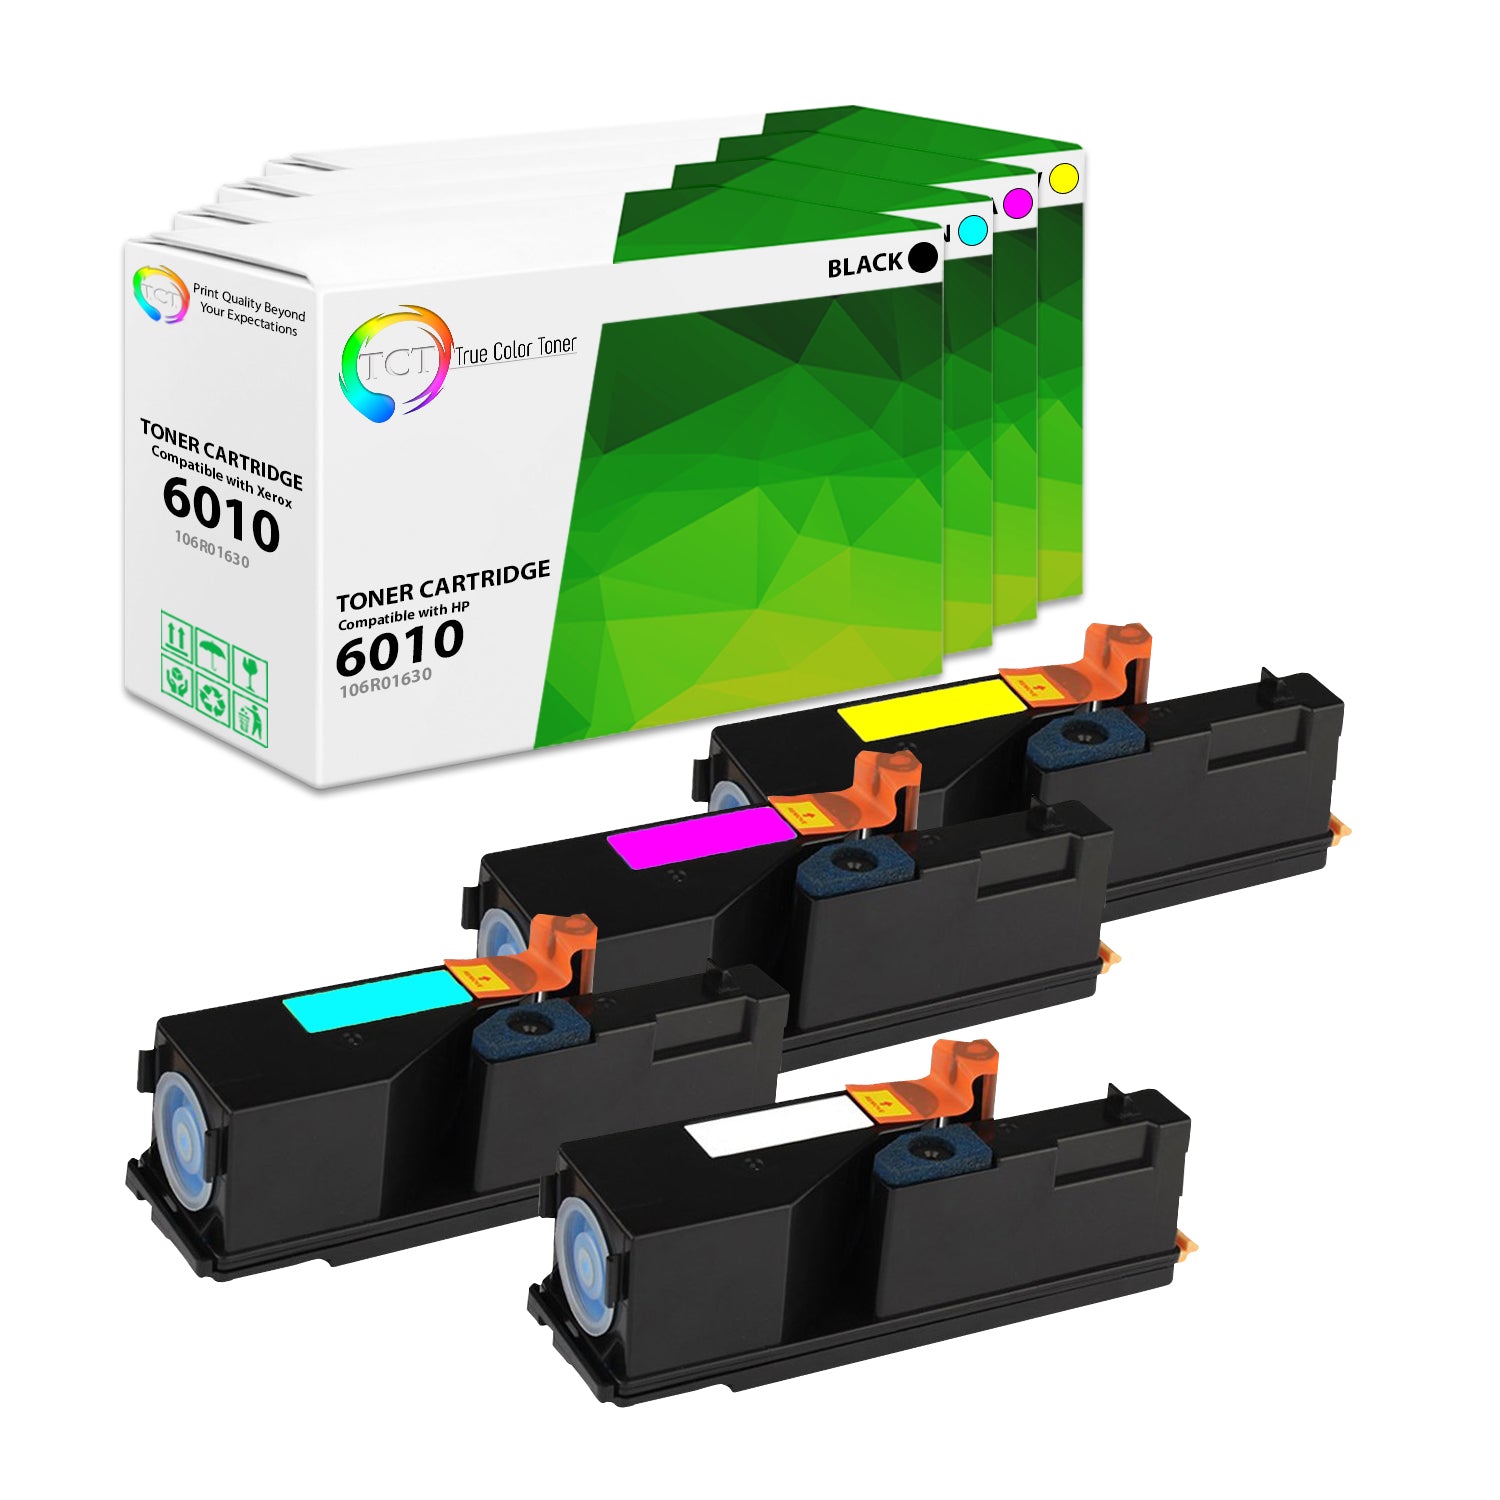 TCT Compatible Toner Cartridge Replacement for the Xerox 6010 Series - 4 Pack (BK, C, M, Y)